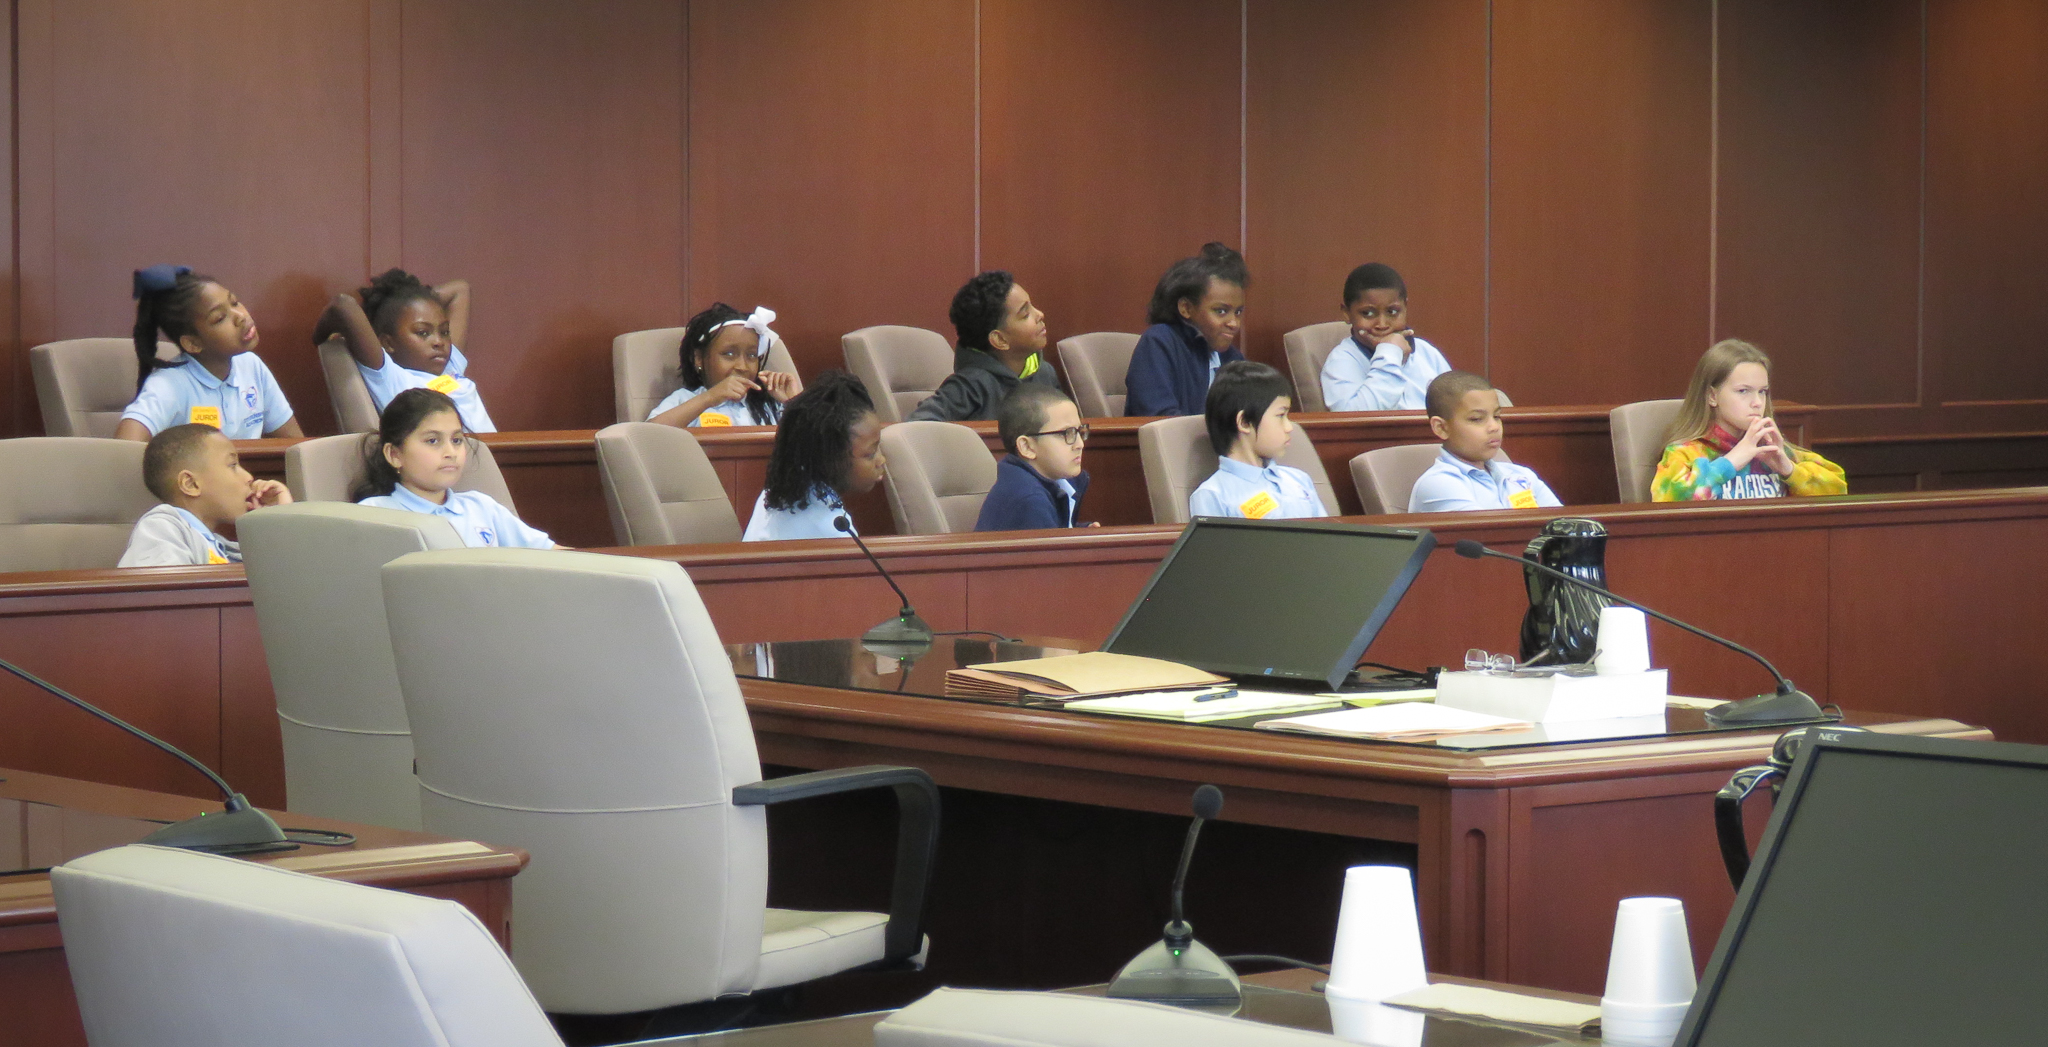 SASCCS Atoms mock trial of the Three Little Pigs during field trip to the U.S. District Courthouse